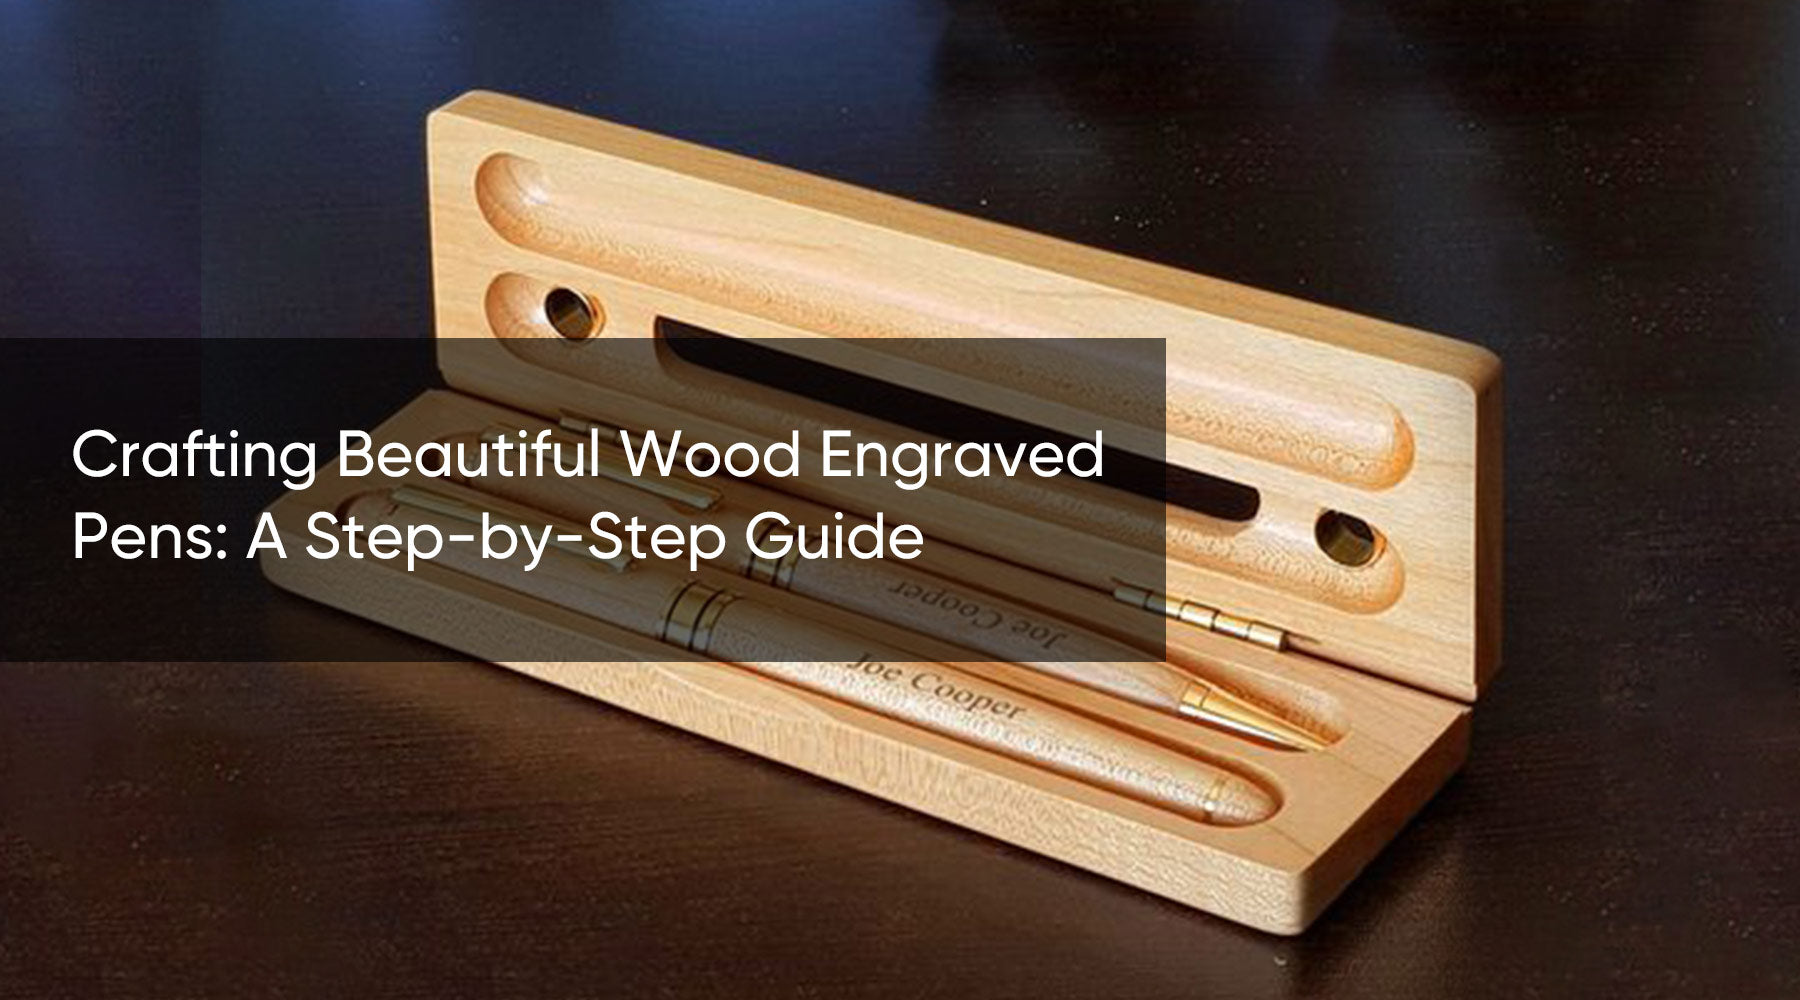 Crafting Beautiful Wood Engraved Pens: A Step-by-Step Guide